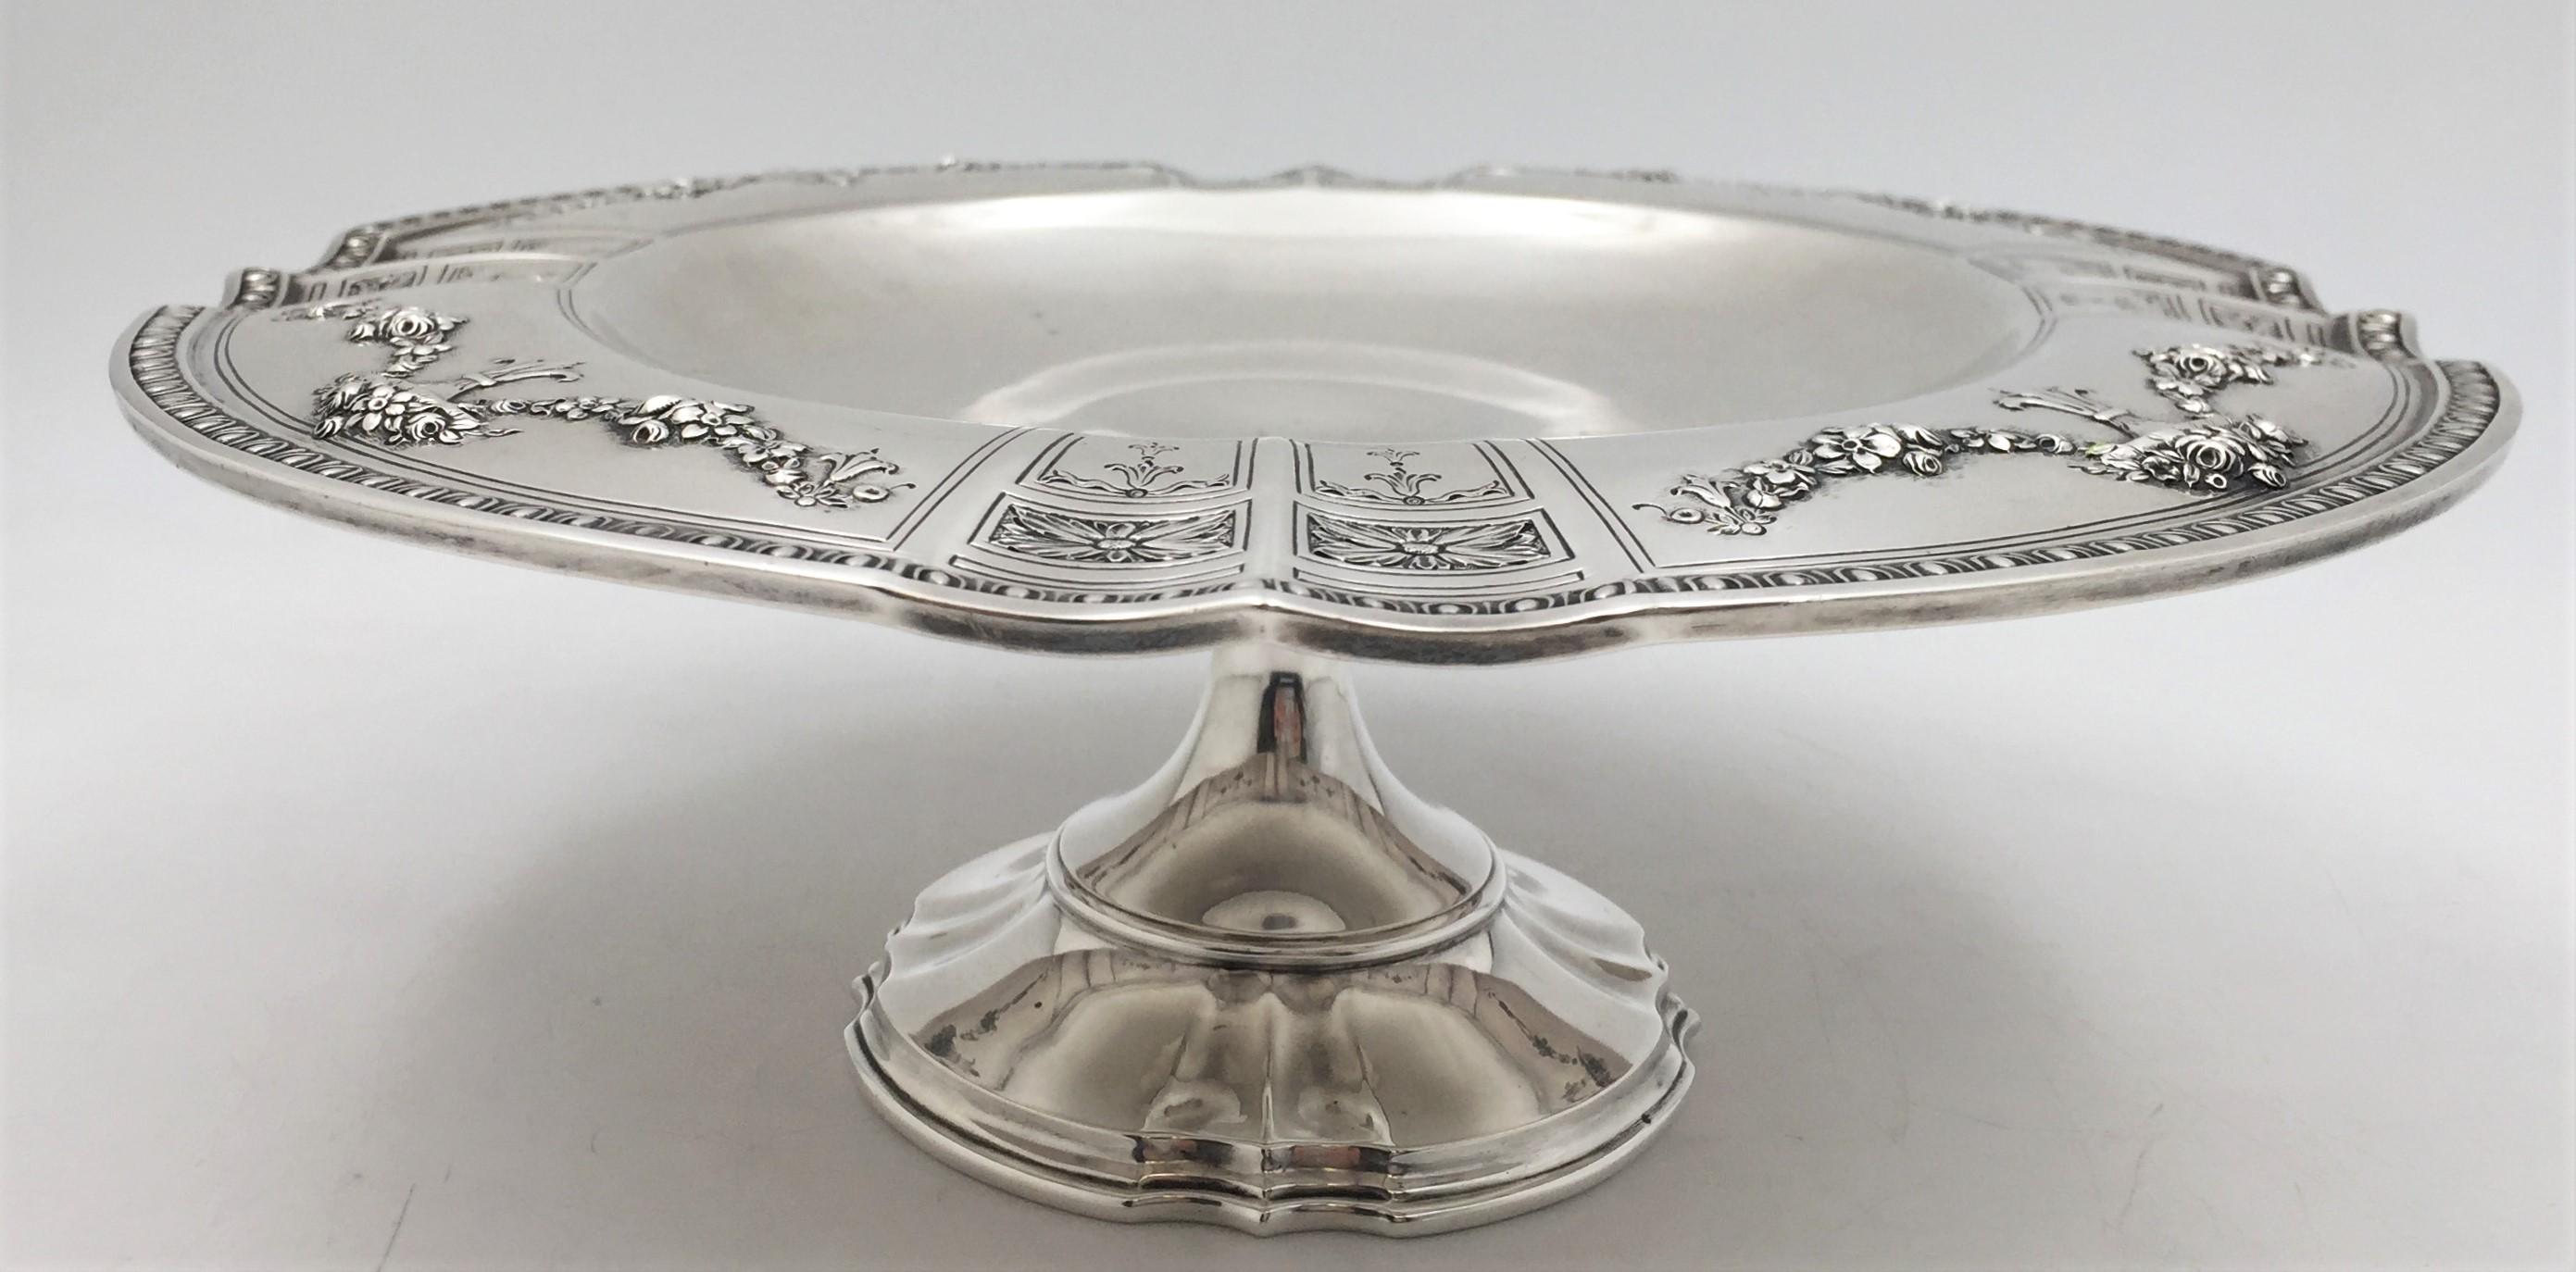 Mount Vernon, sterling silver compote centerpiece, made between 1913 and 1923, with an ornate, gadrooned rim depicting garlands of flowers and decorative motifs in cartouches. It measures 10 1/2'' in diameter by 4'' in height, weighs 22.5 troy